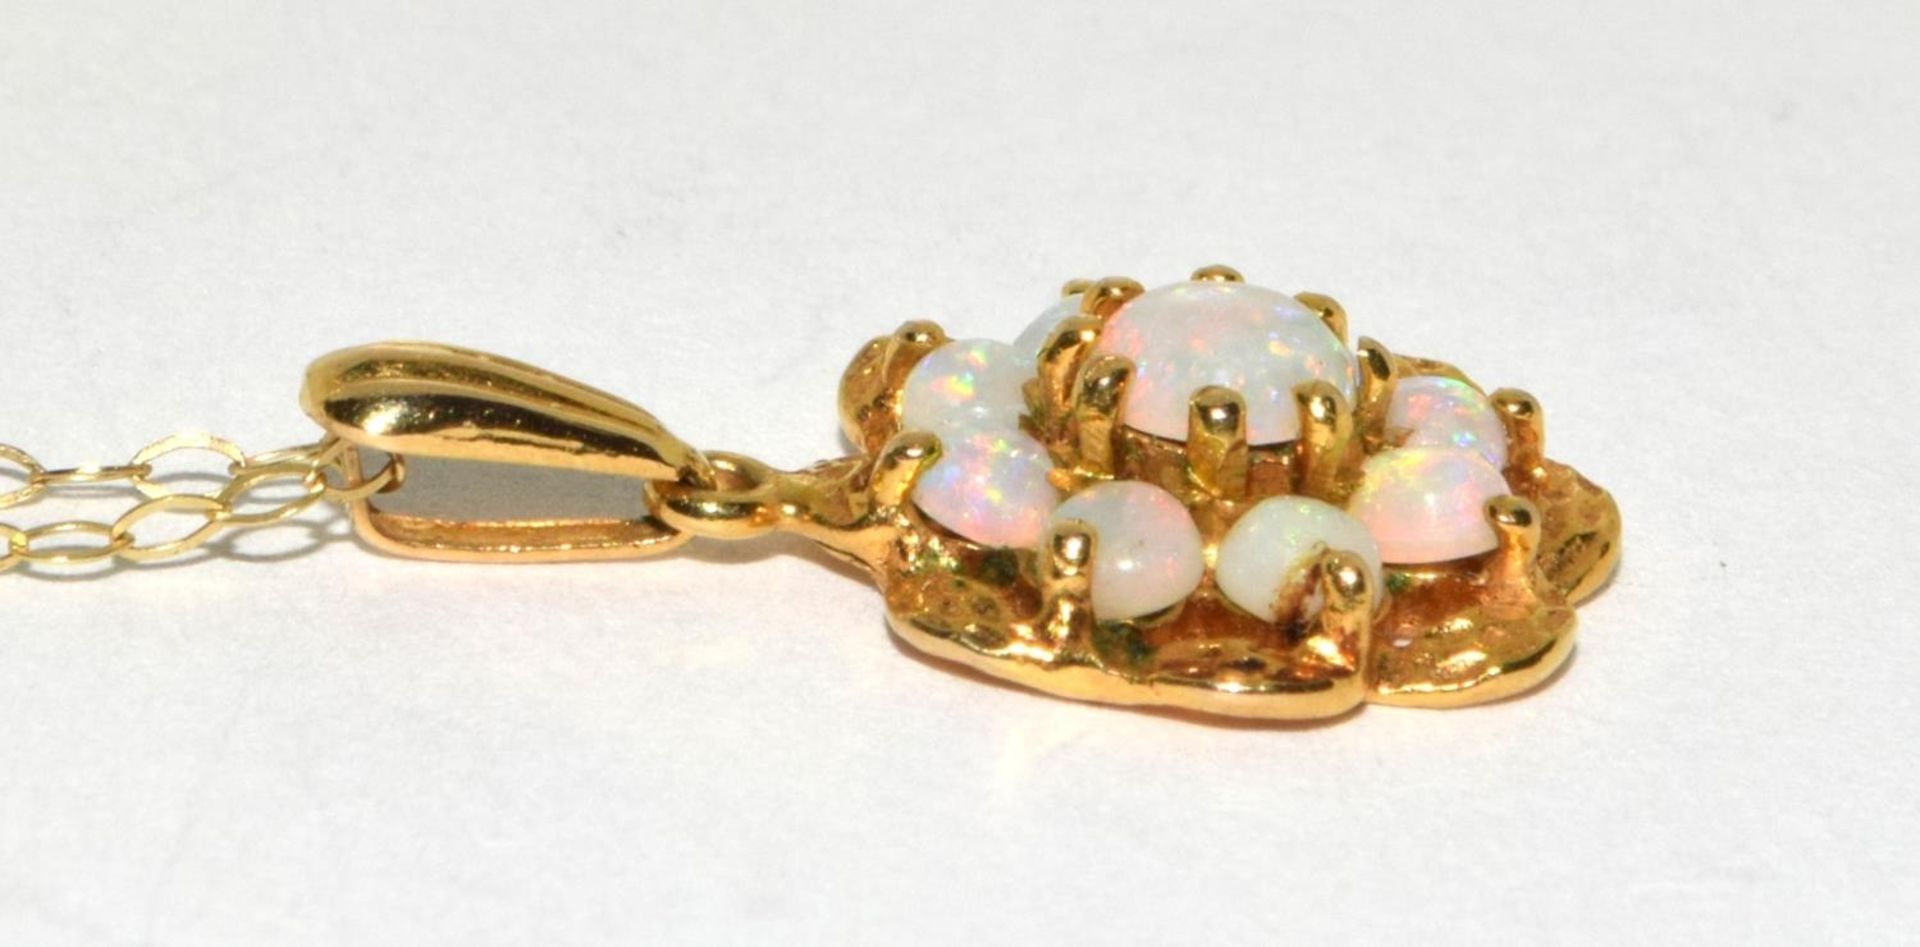 9ct gold ladies Opal cluster pendant necklace with a chain 40cm long - Image 3 of 6